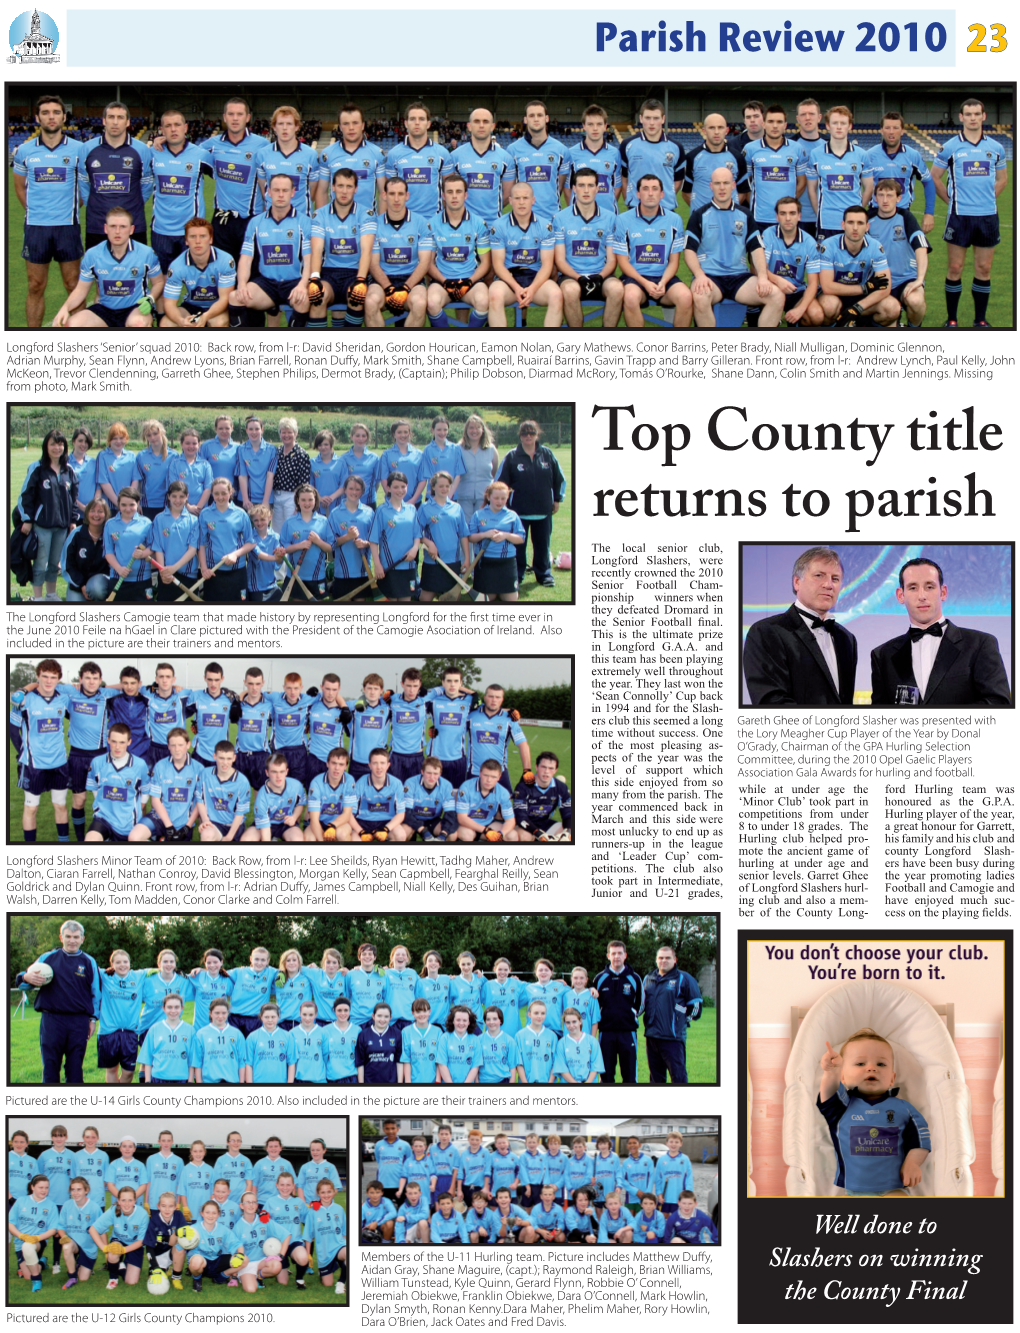 Top County Title Returns to Parish